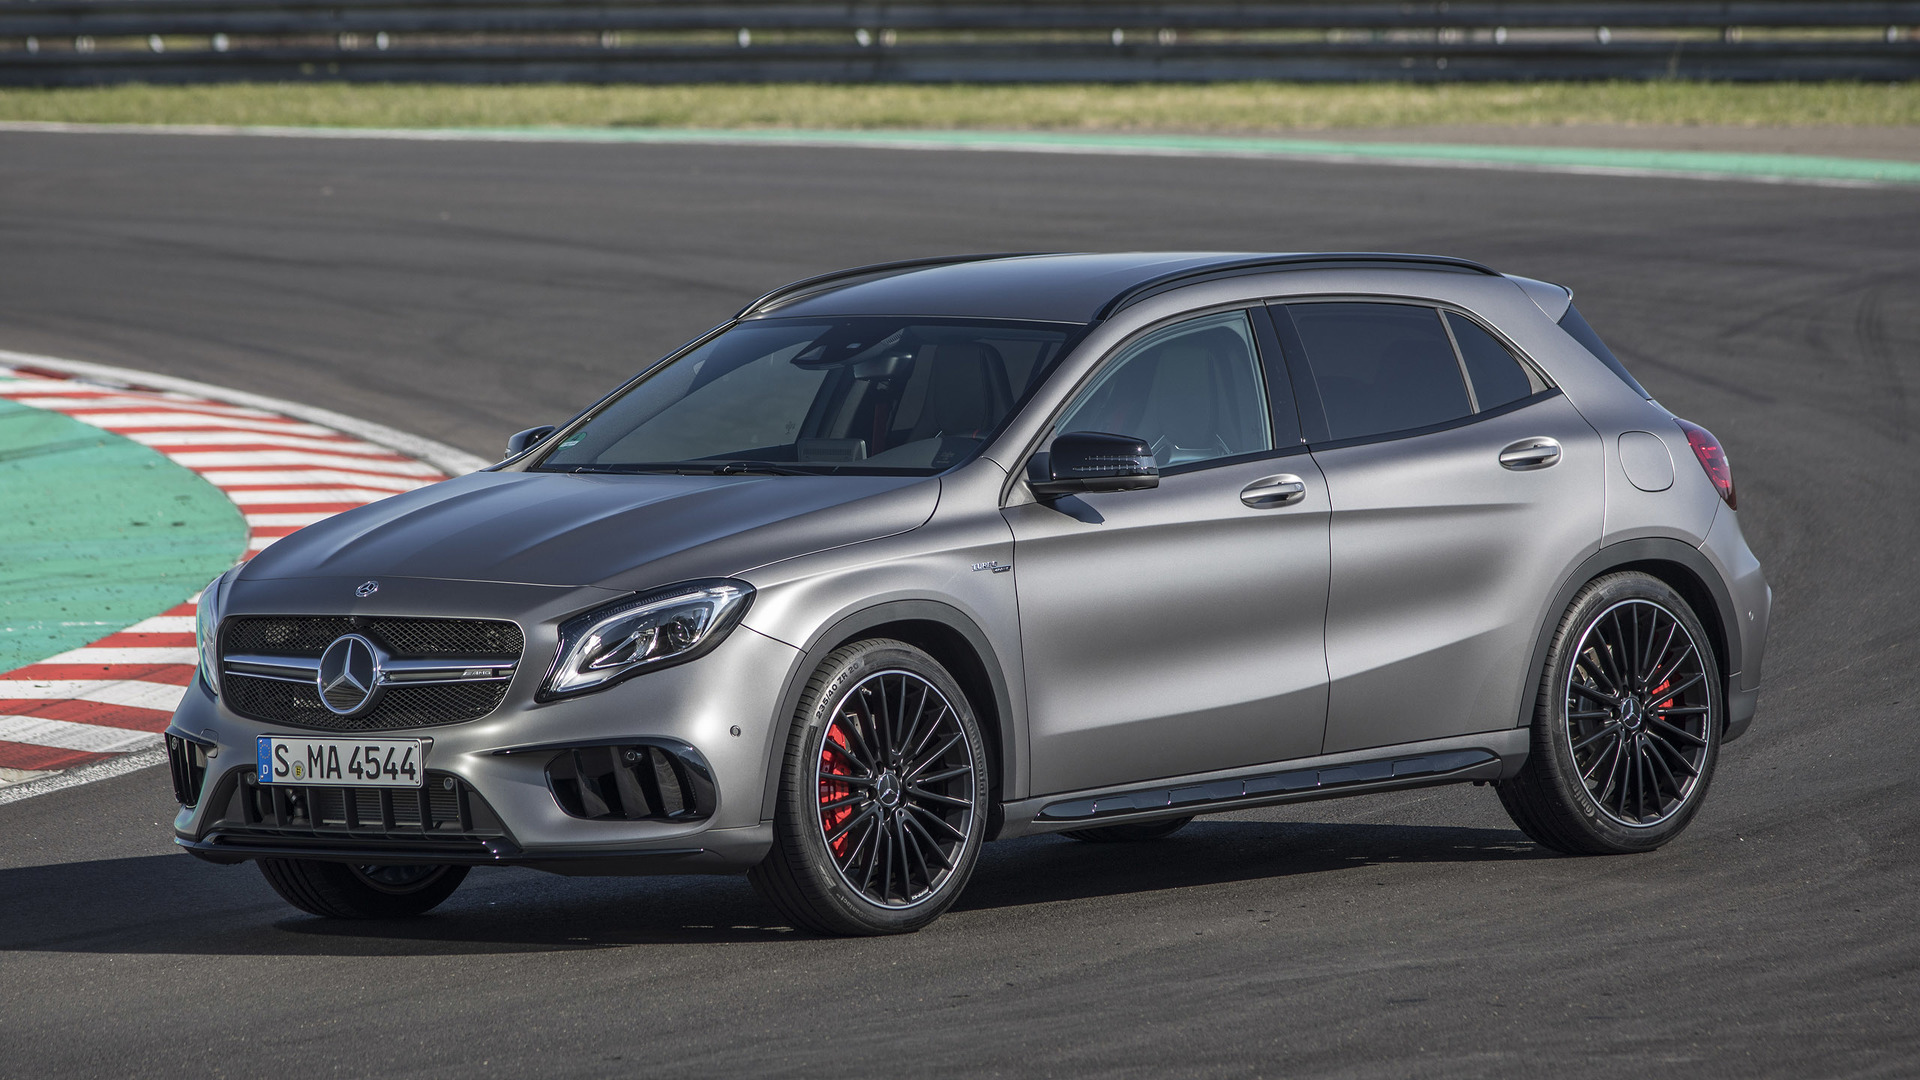 2018 Mercedes-AMG GLA45 First Drive: When Luxury Car Meets Hot Hatch